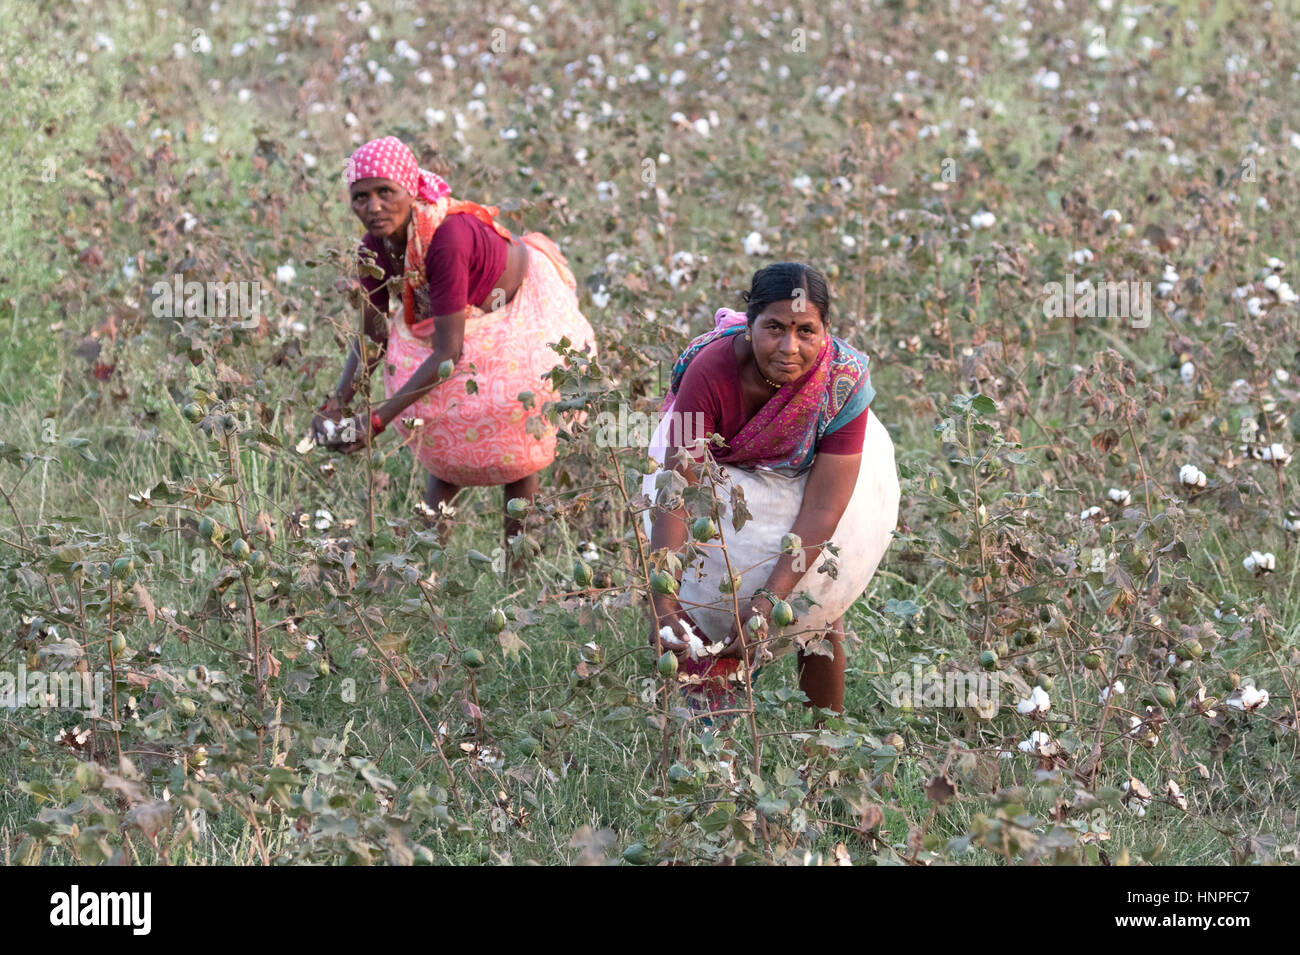 Indian women working picking cotton in a cotton field, Maharashtra State, India, Asia Stock Photo